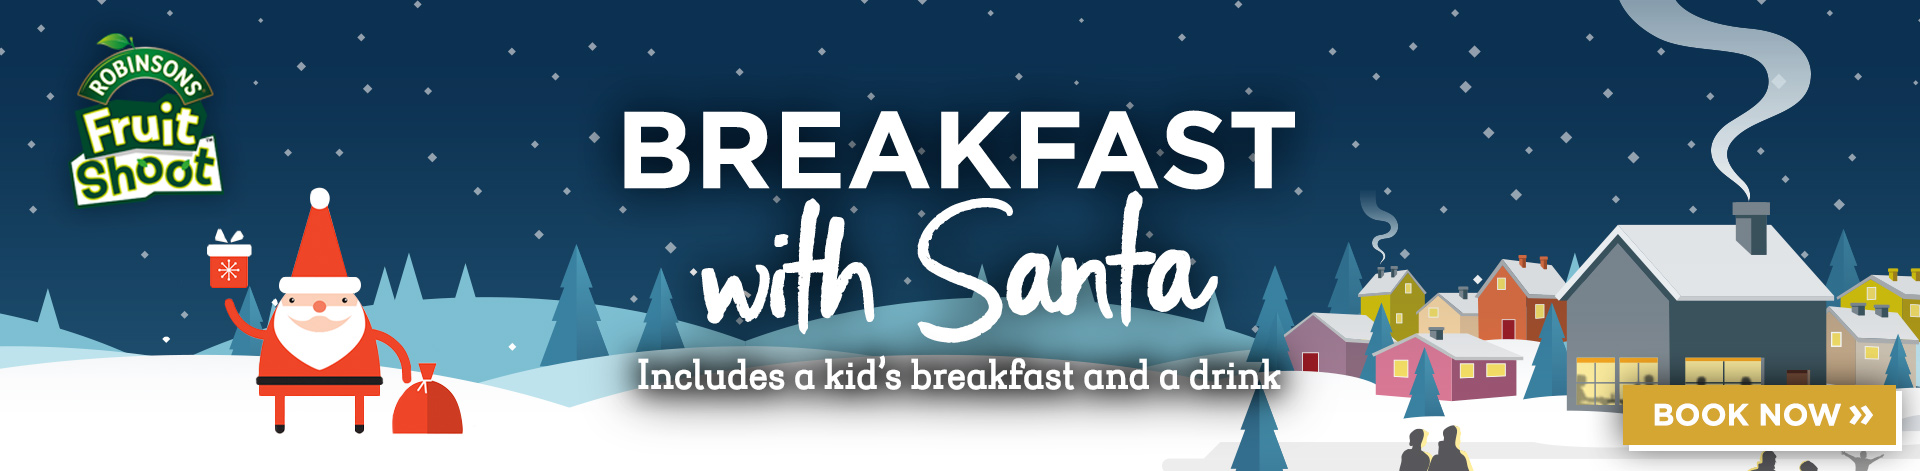 Breakfast with Santa menu at The Hole in the Wall